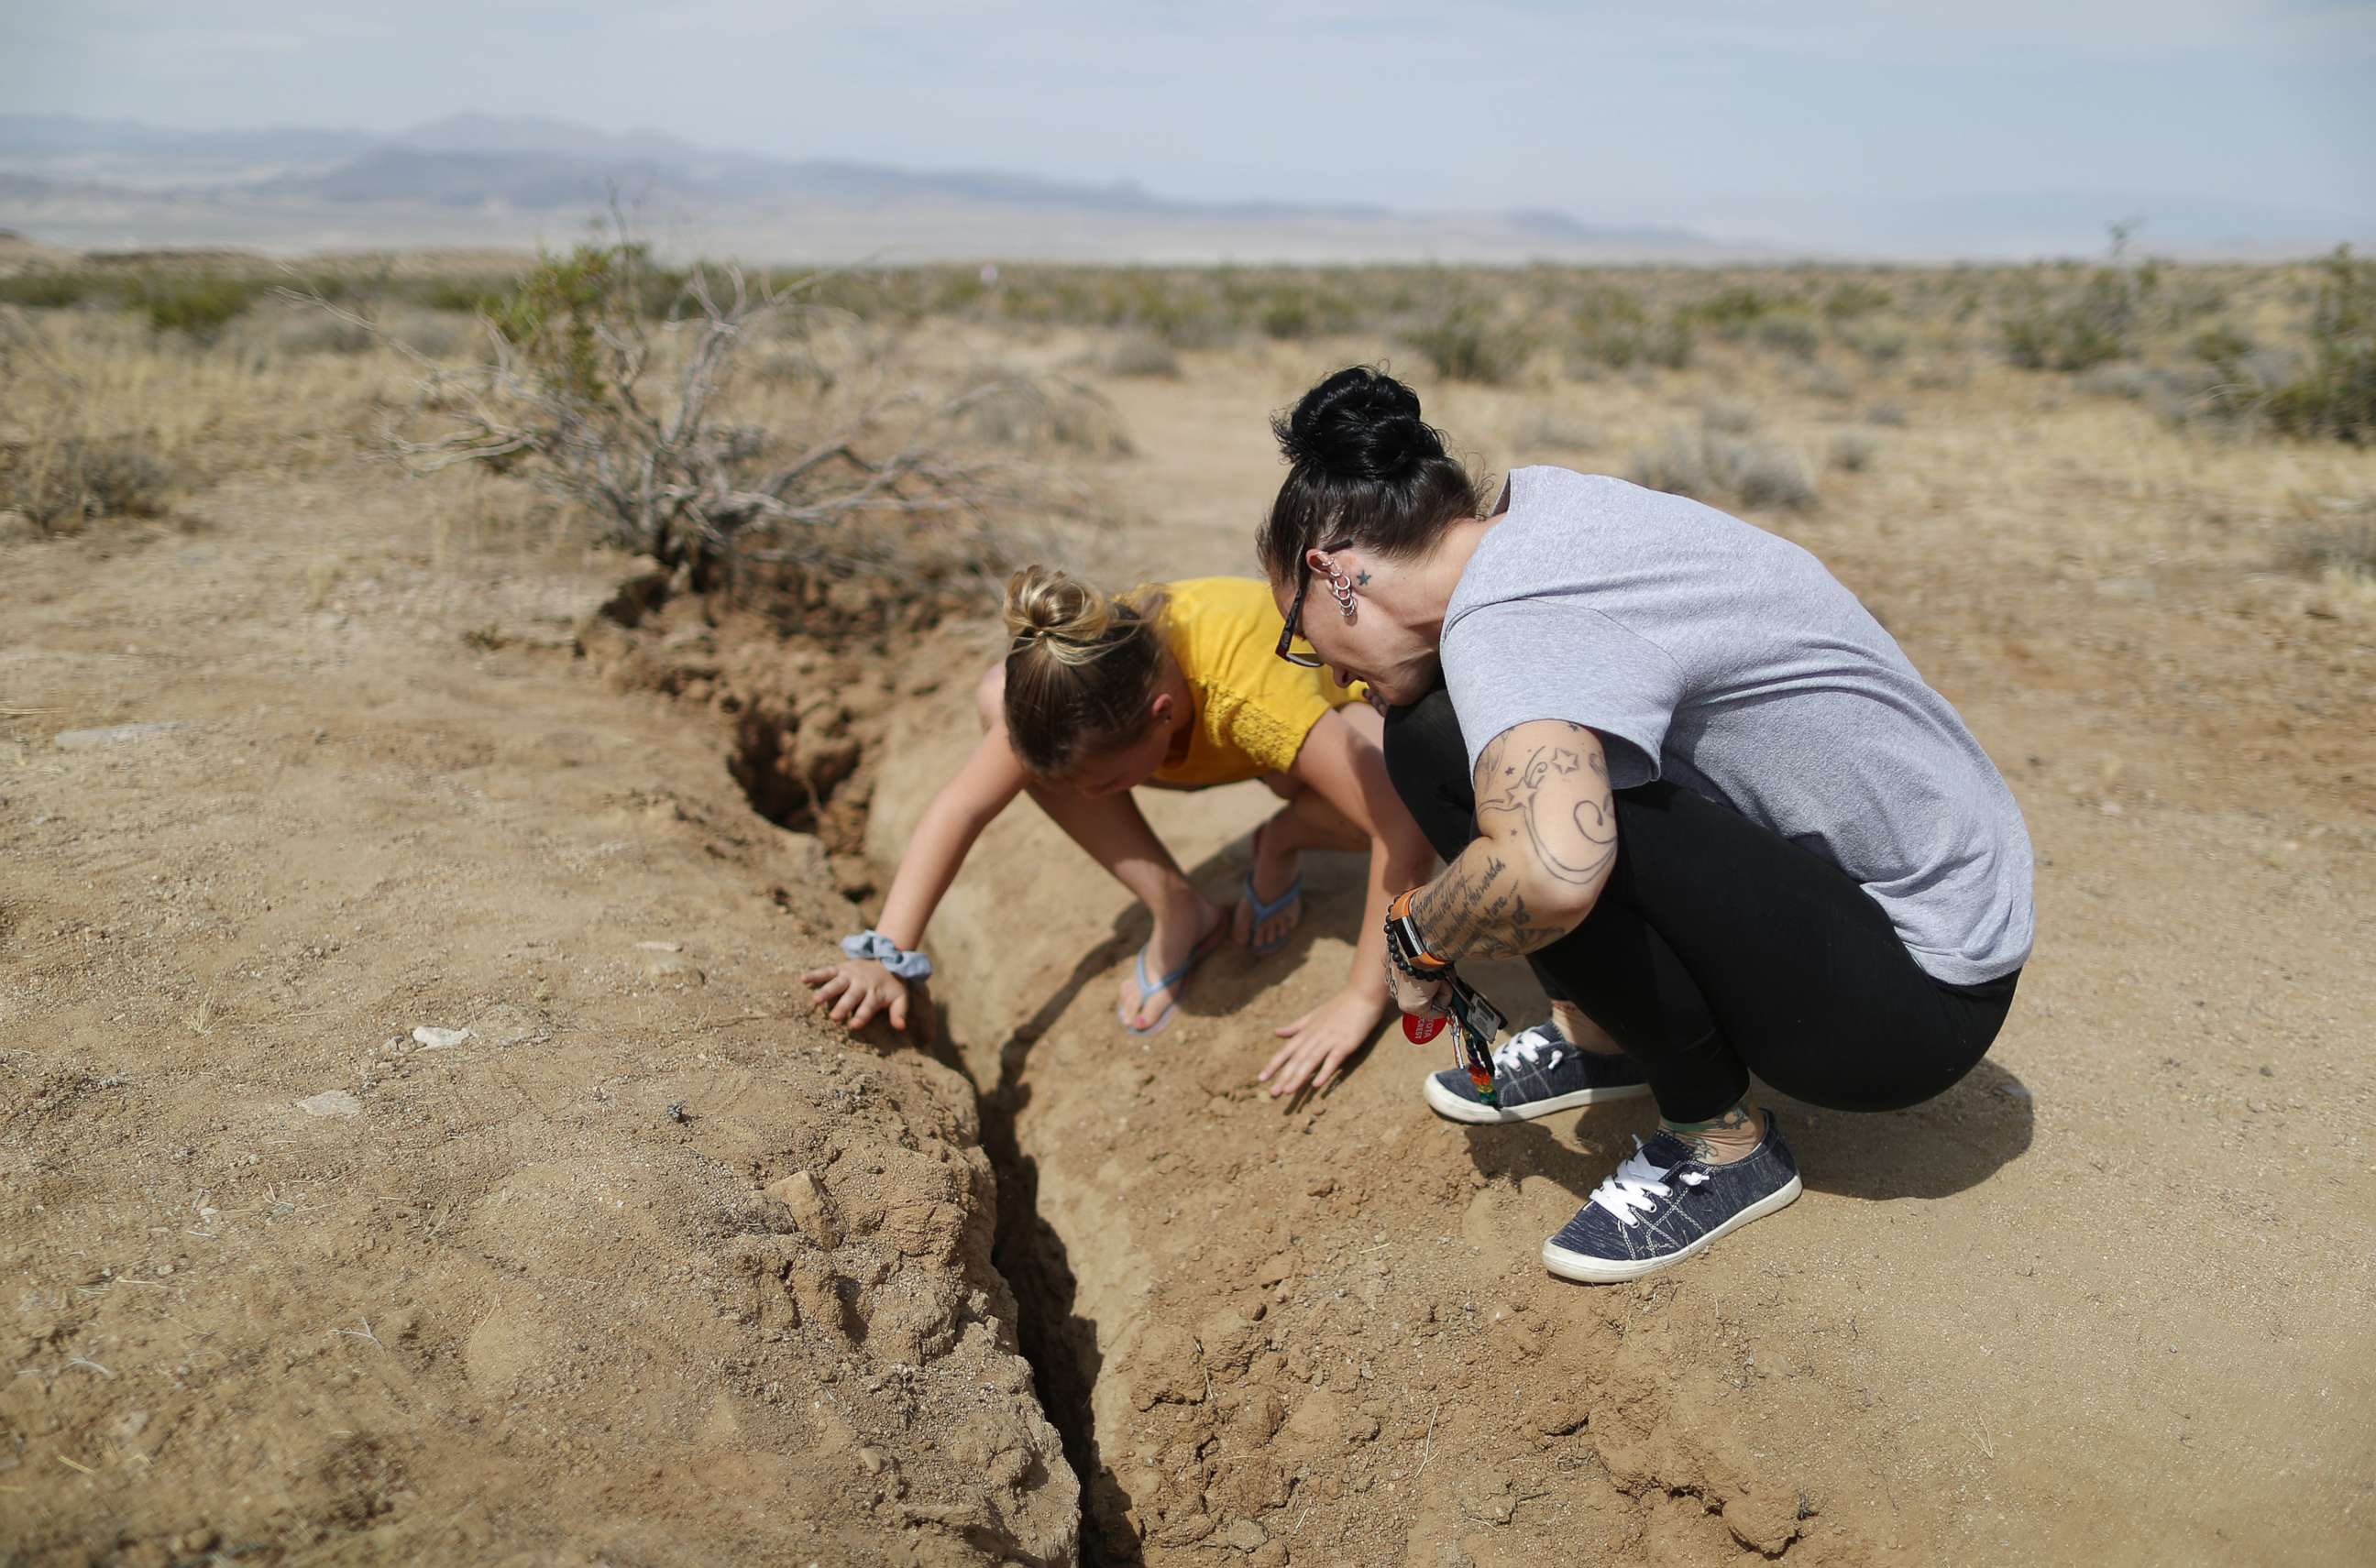 PHOTO: Ridgecrest residents inspect a recent fault rupture following two large earthquakes in the area, July 7, 2019, near Ridgecrest, Calif.